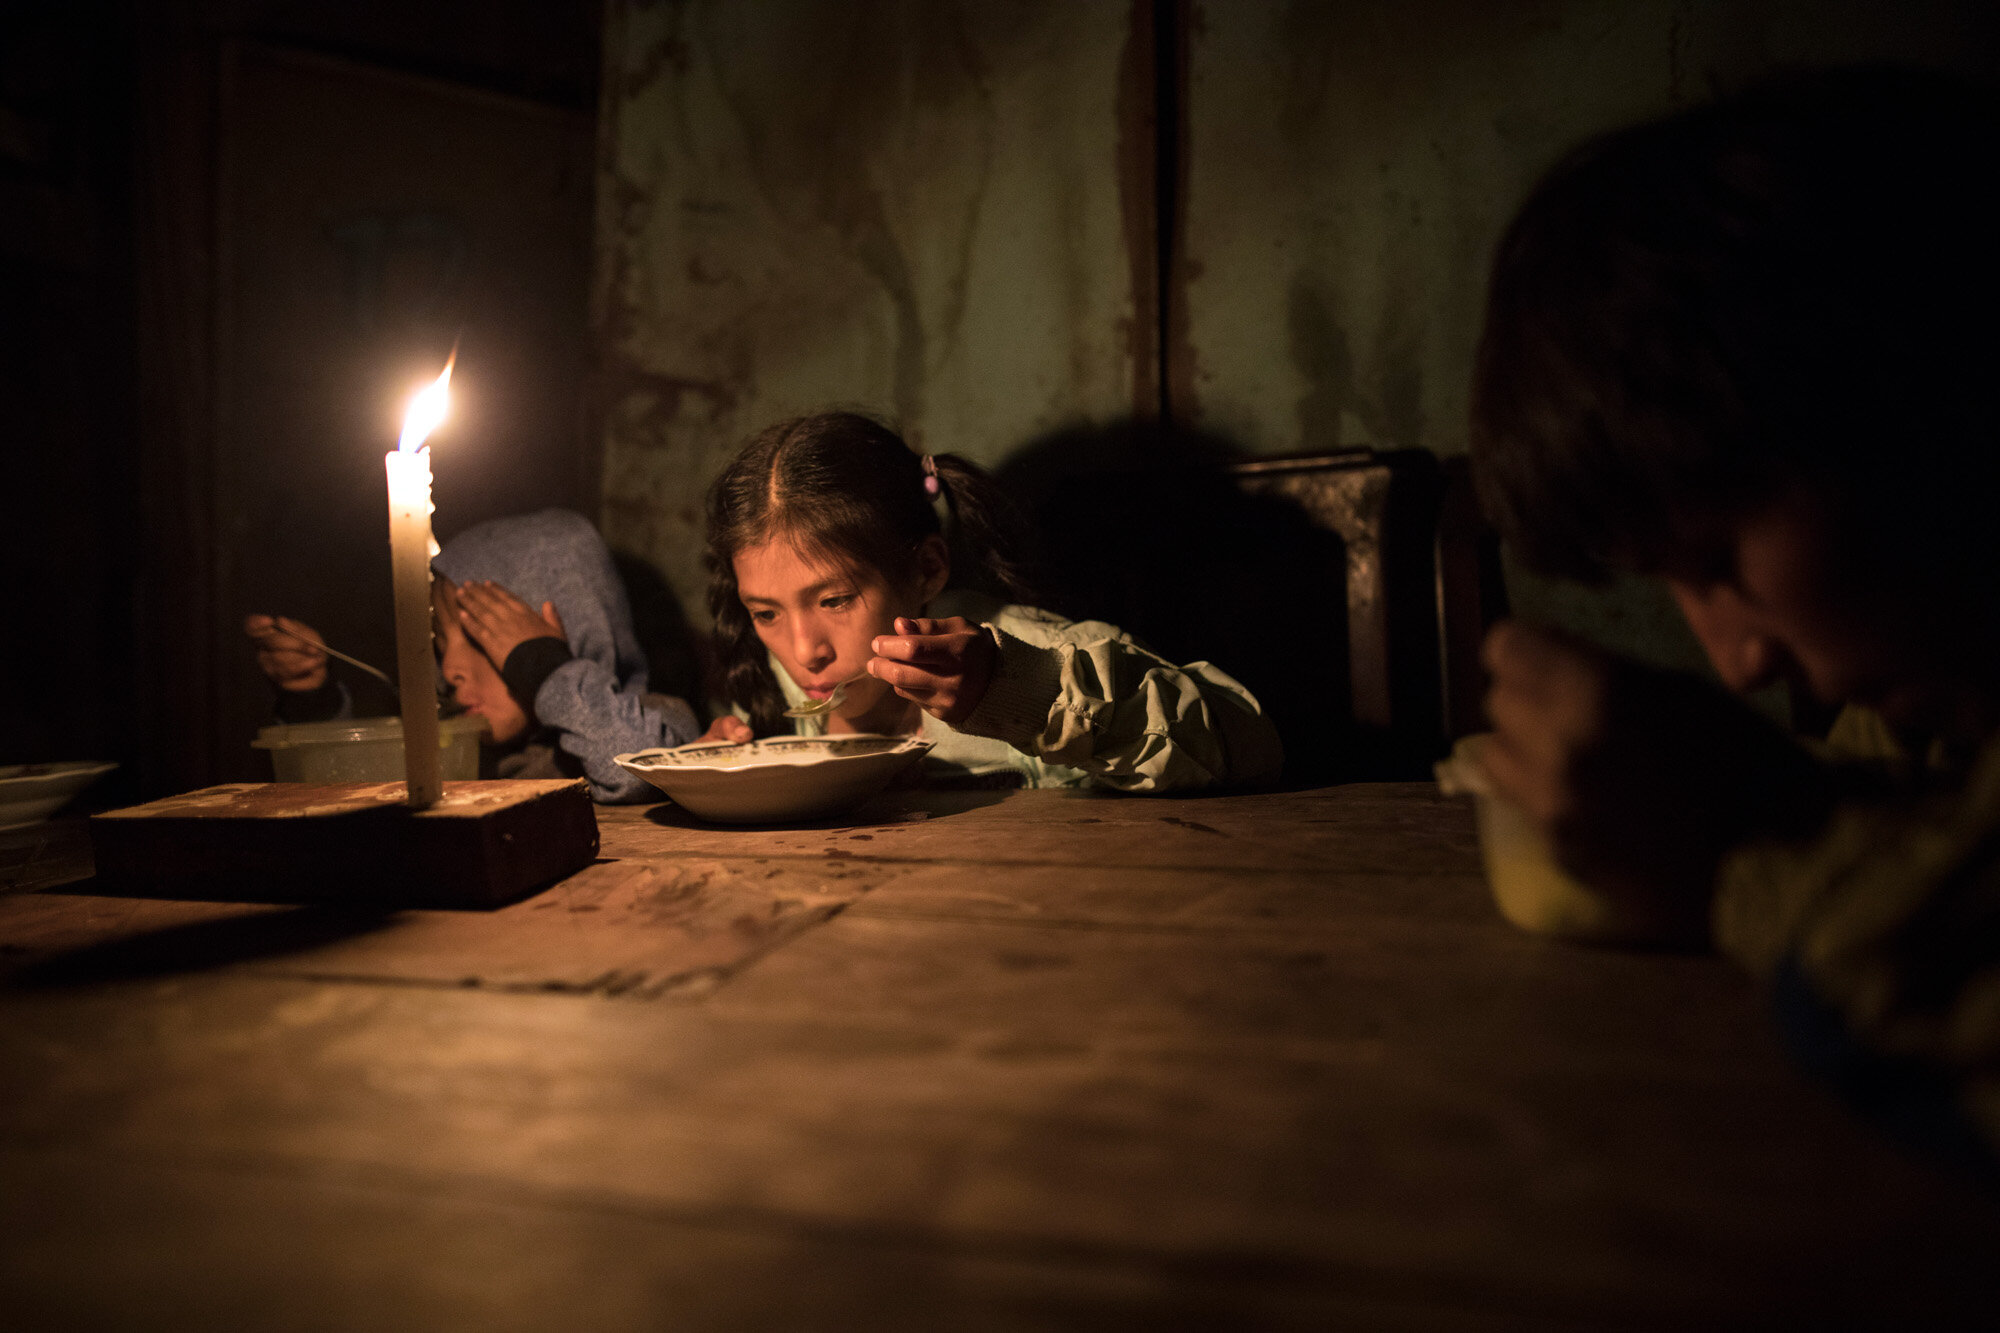  Siblings, from left, Estiben, Estefany and Javier Aquino eat dinner illuminated by a candle in their home in the Nueva Esperanza neighborhood, which has no access to electricity, in Lima, Peru, on June 8, 2020. (AP Photo/Rodrigo Abd) 